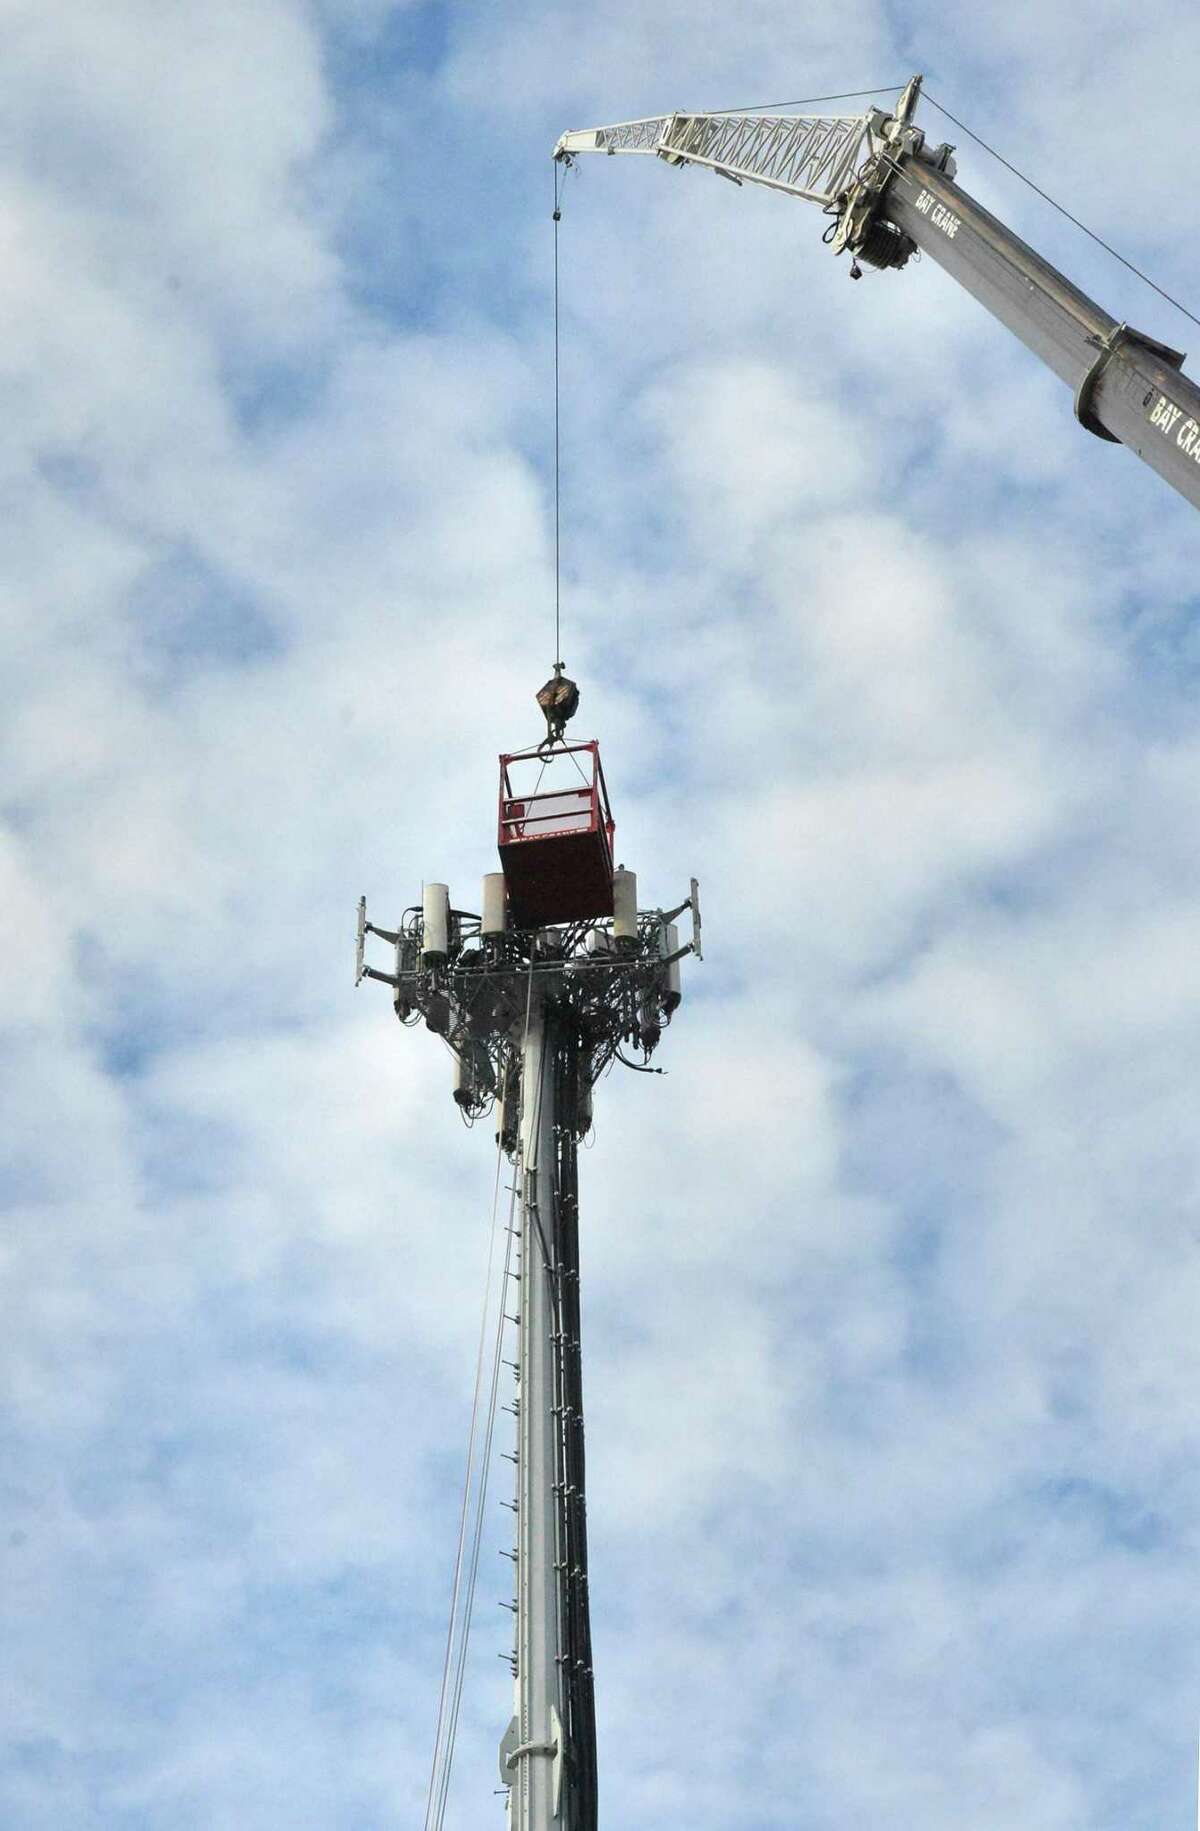 Workers access a cell tower with a crane in Norwalk, Conn., in 2016.